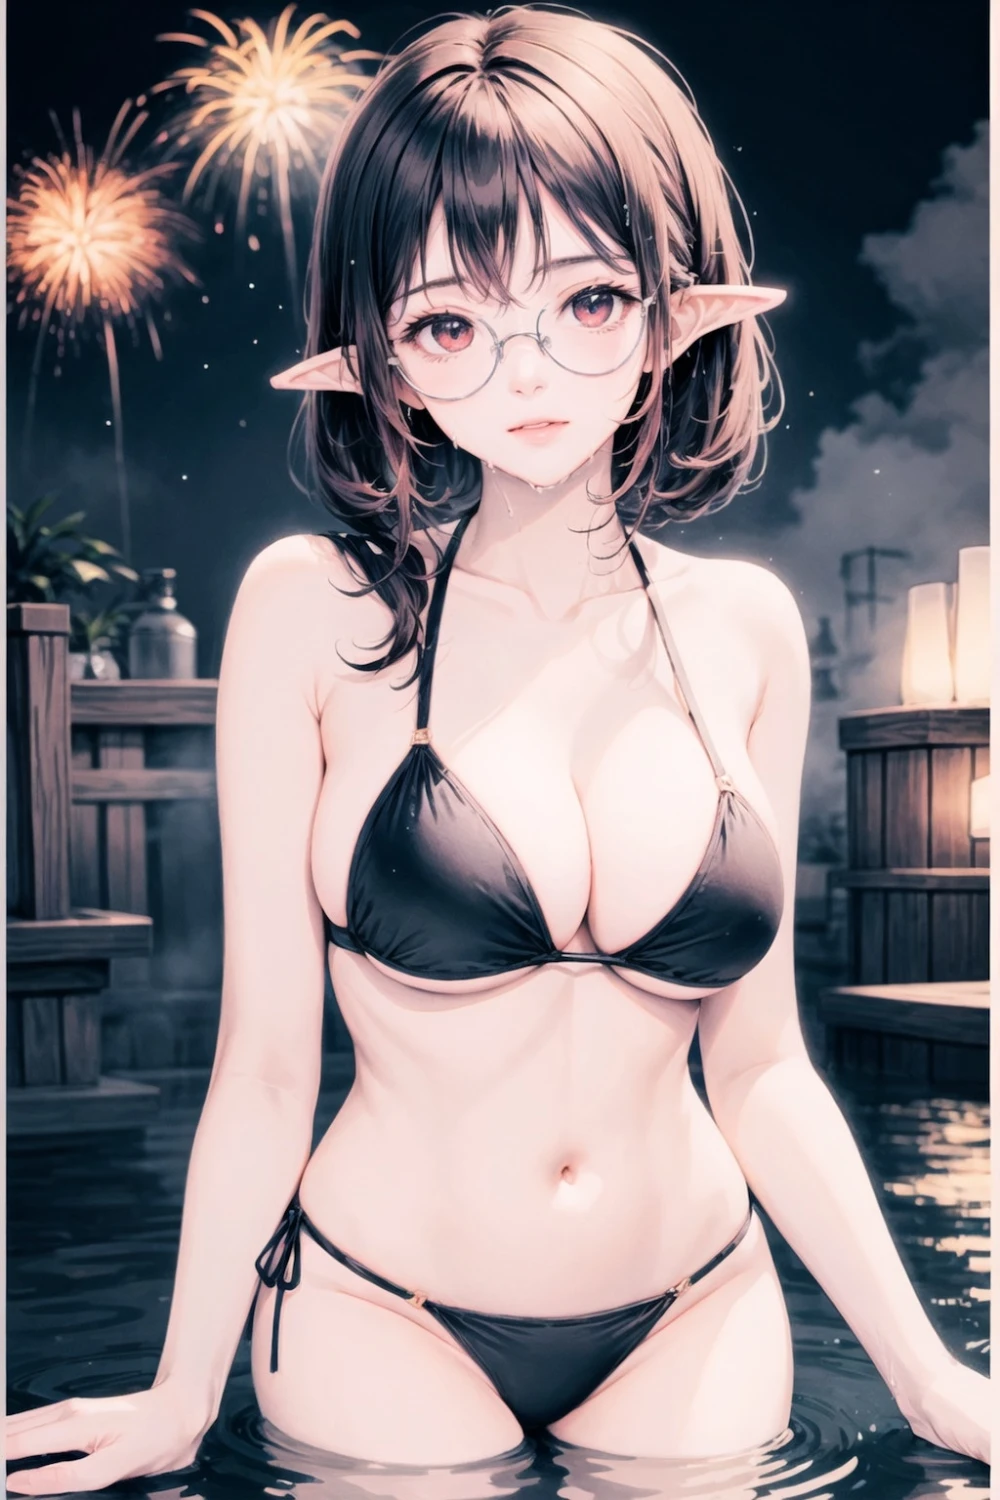 onsen-anime-style-all-ages-22